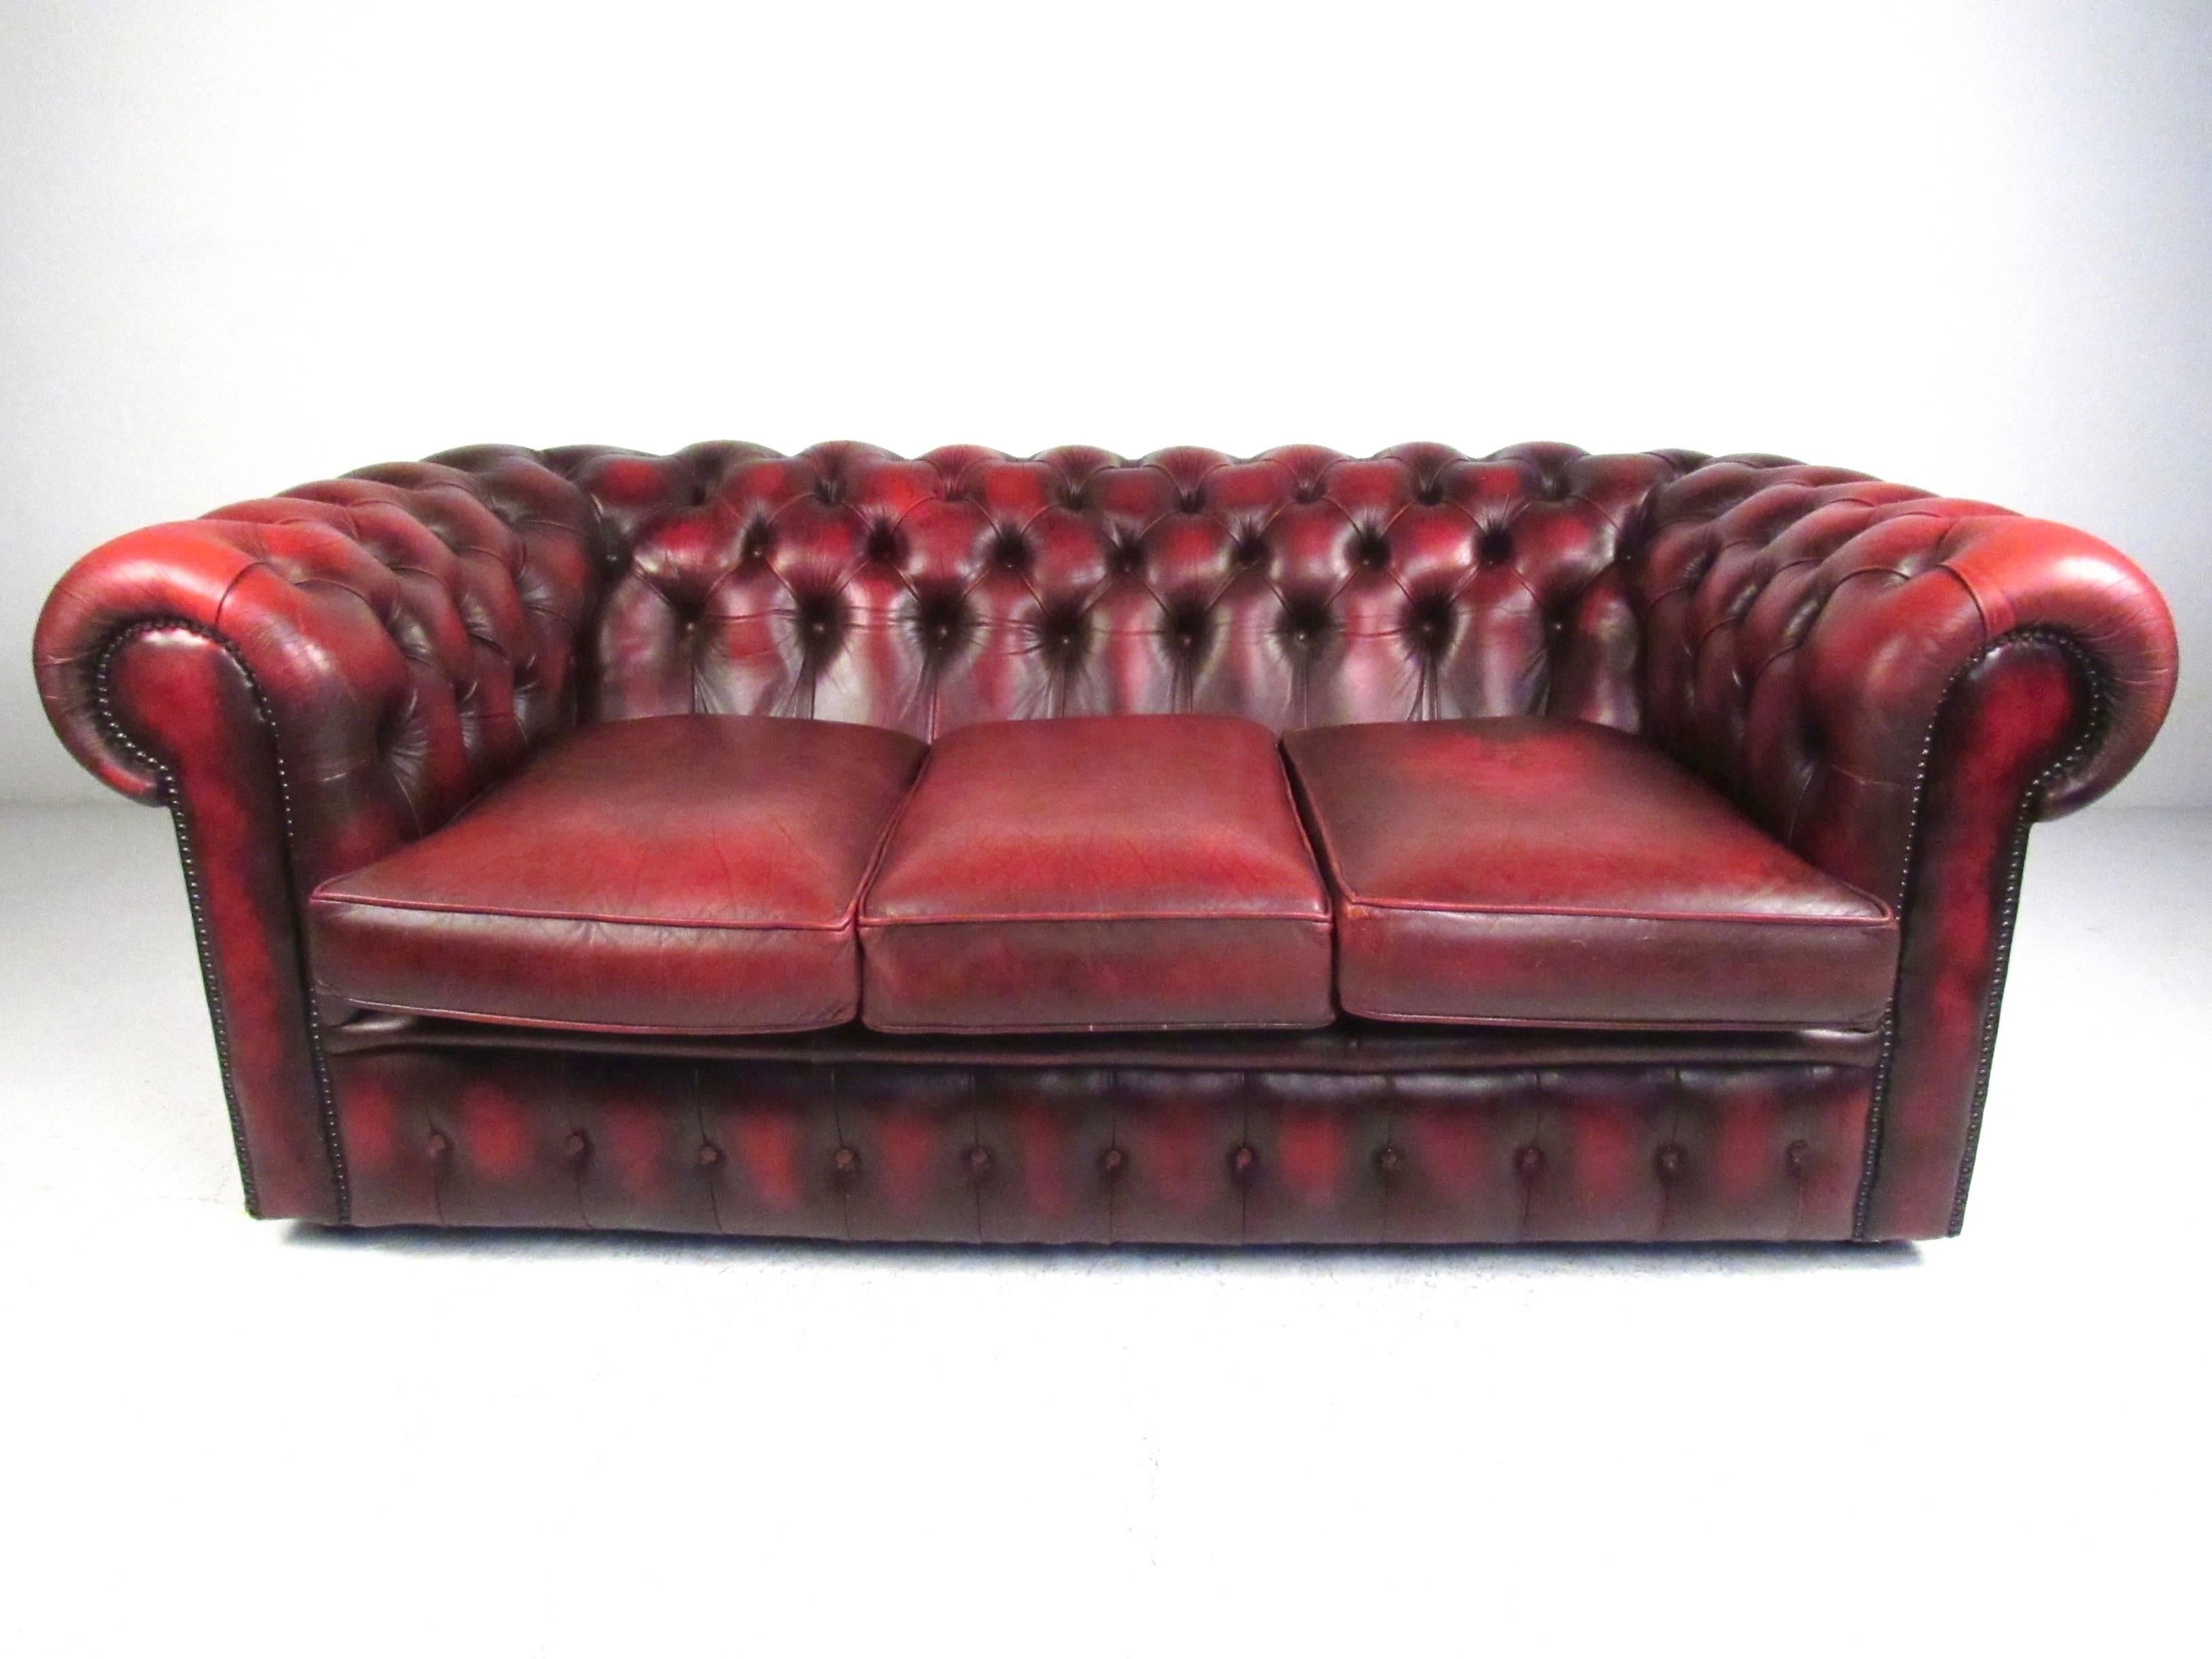 This stylish vintage Chesterfield features rich tufted leather with a unique patina from time and use. This impressive sofa features elegant scrolled arms and comfortable three-seat configuration, making a perfect addition to home or business.